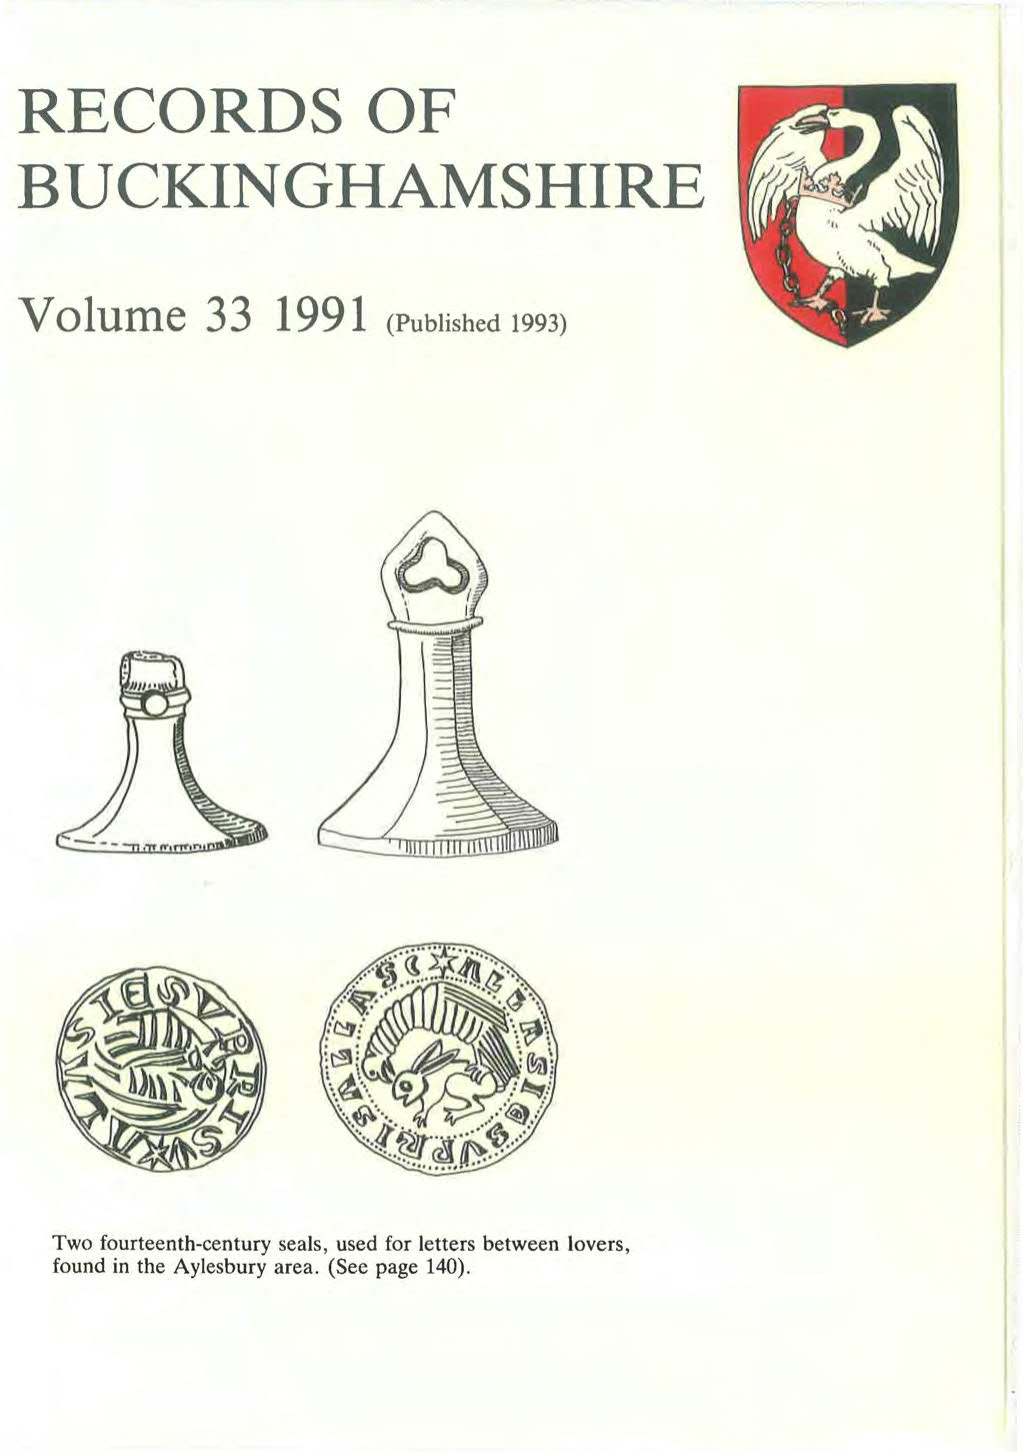 Cover of Records volume 33